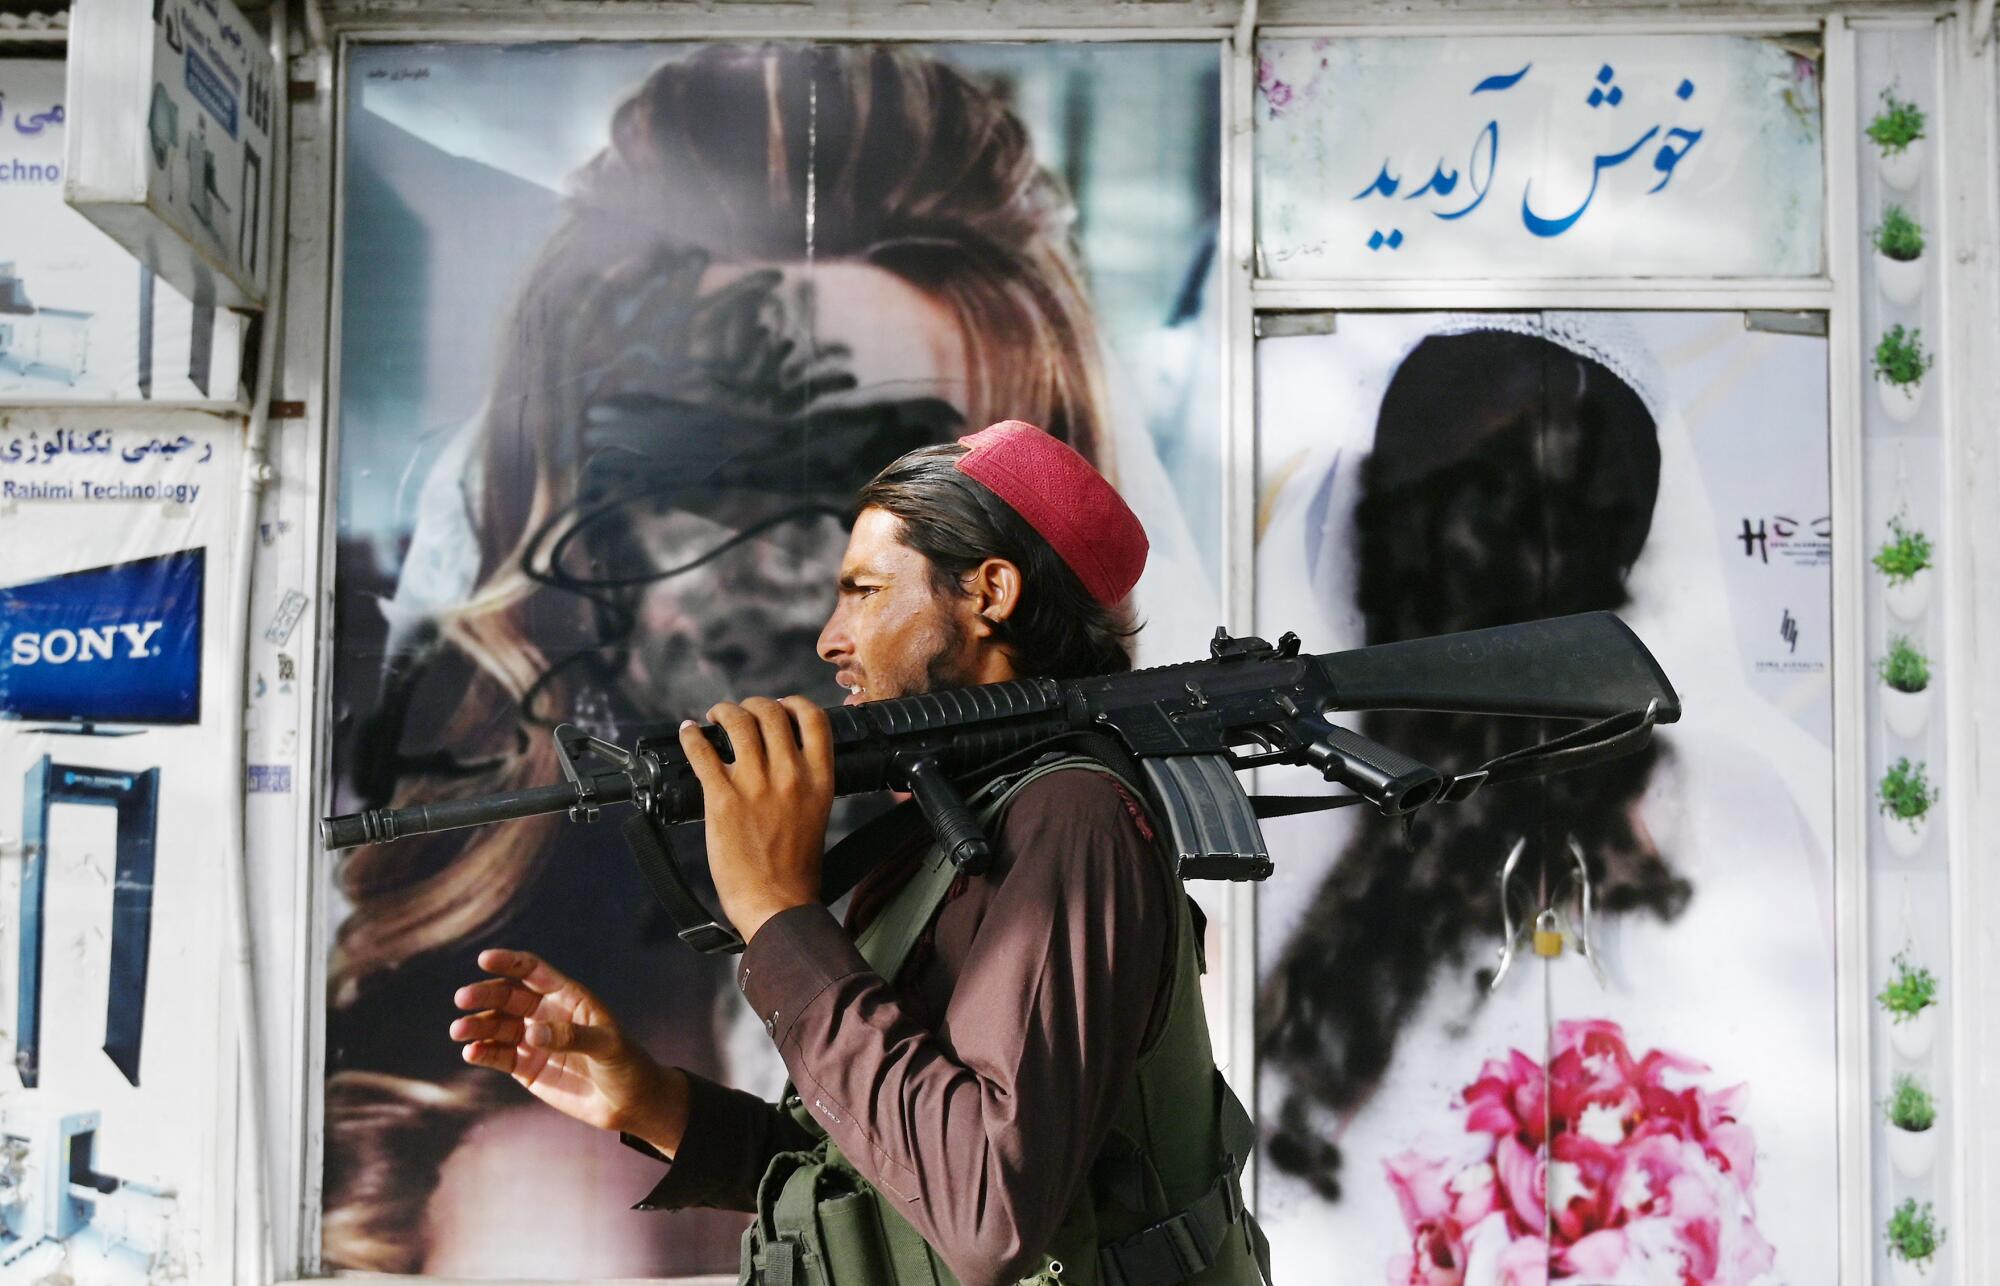 A Taliban fighter holding a gun on his shoulder walks past images of women that have been obscured by paint.